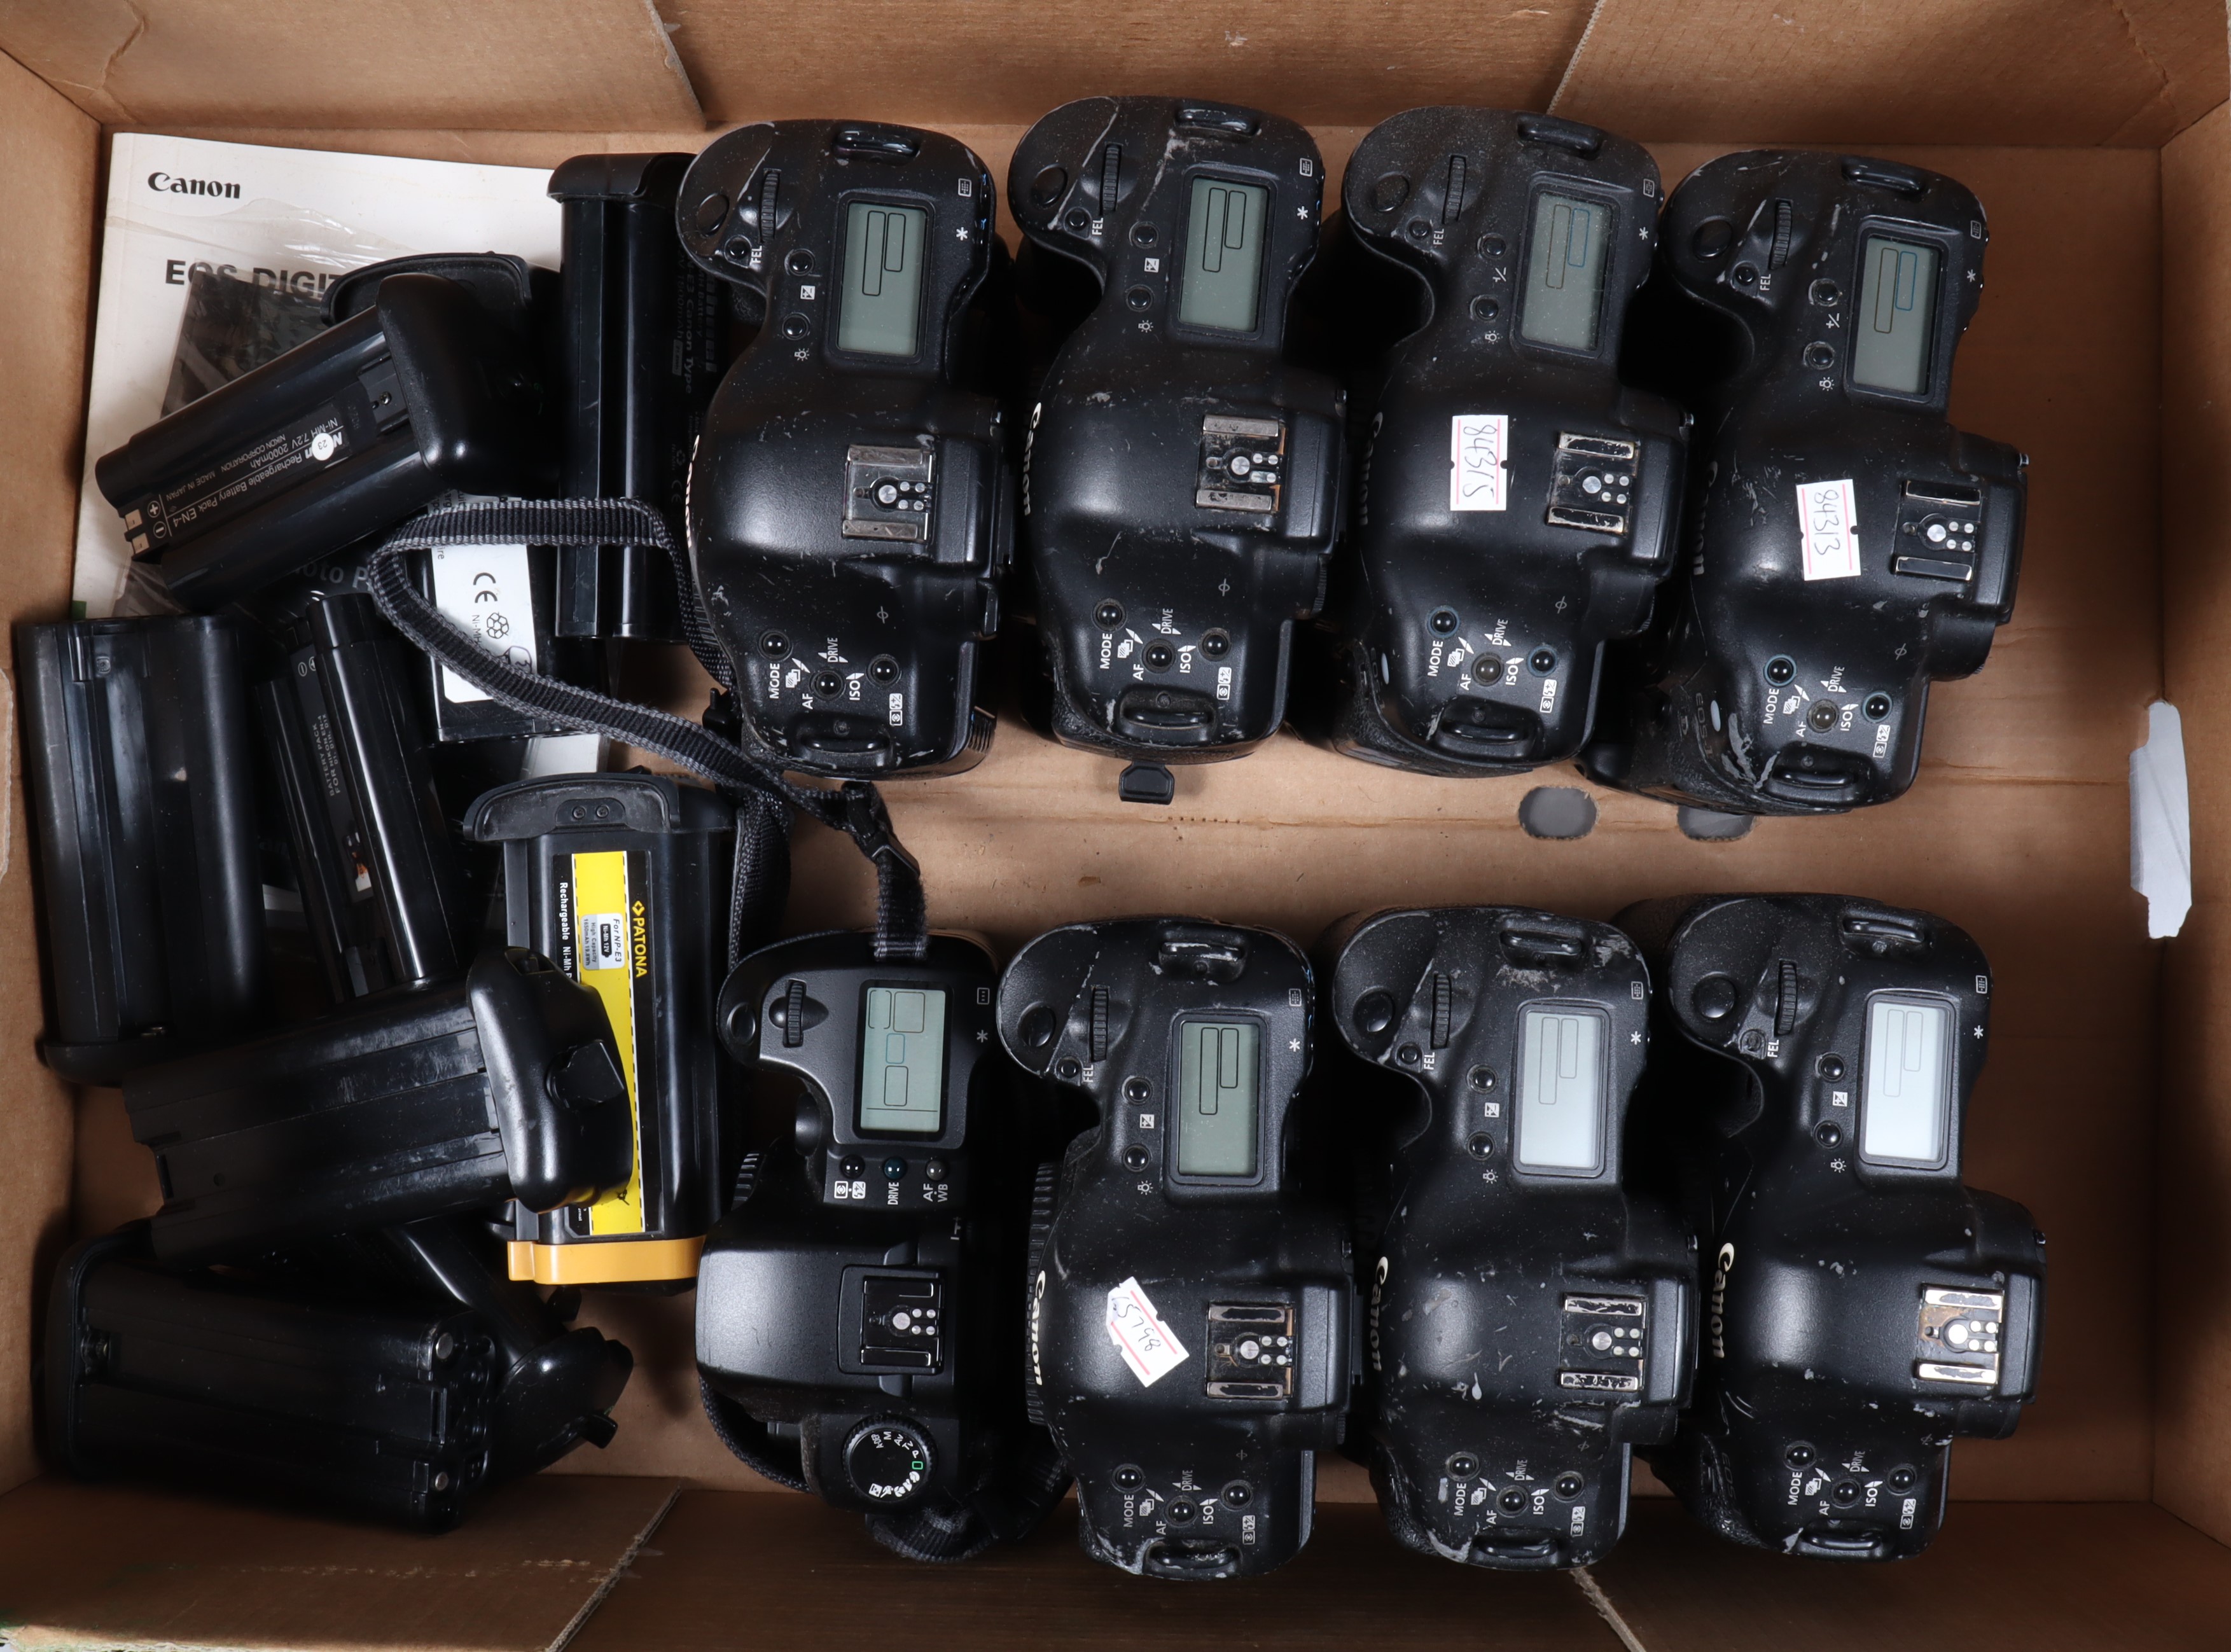 A Tray of Canon EOS DSLR Camera Bodies, two Canon EOS-1 D, five EOS-1 D Mark II n, all with